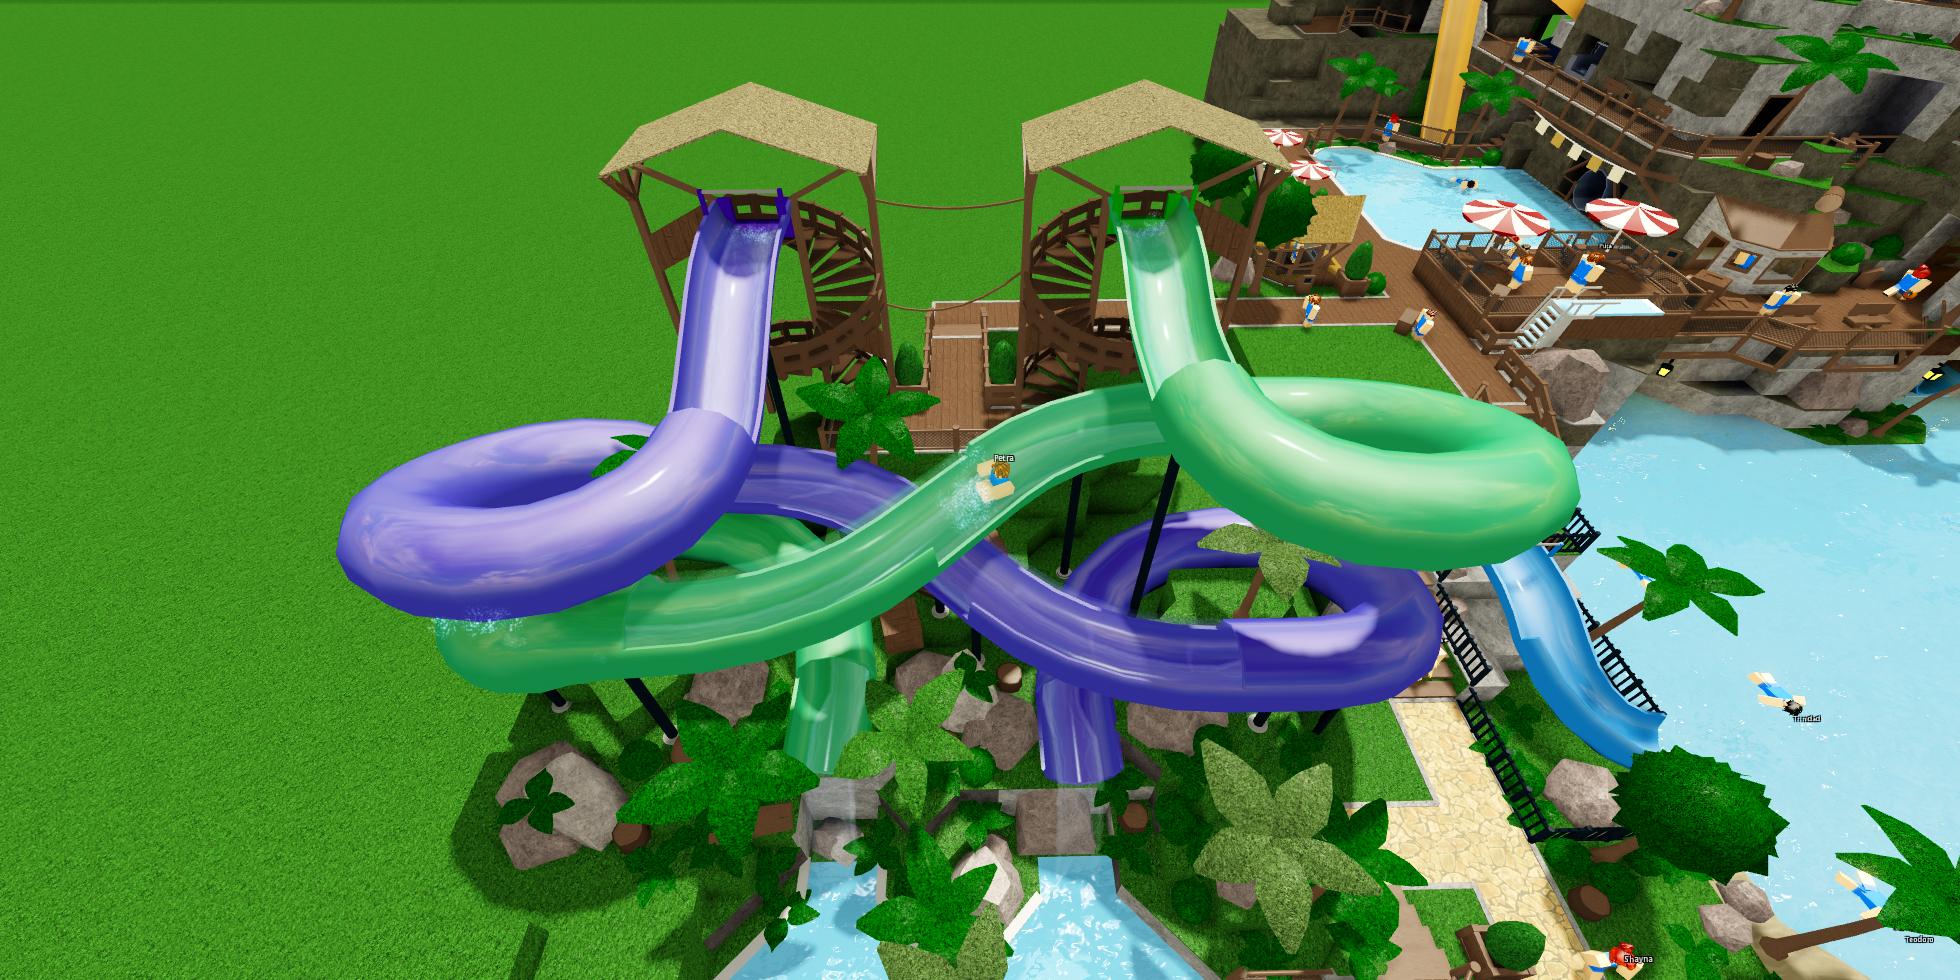 Dennis On Twitter My New Game Waterparkworld Is Approaching A Beta Release Get An Early Taste Of The Game By Taking A Look At A Few In Progress Water Parks That Have Been - water park roblox